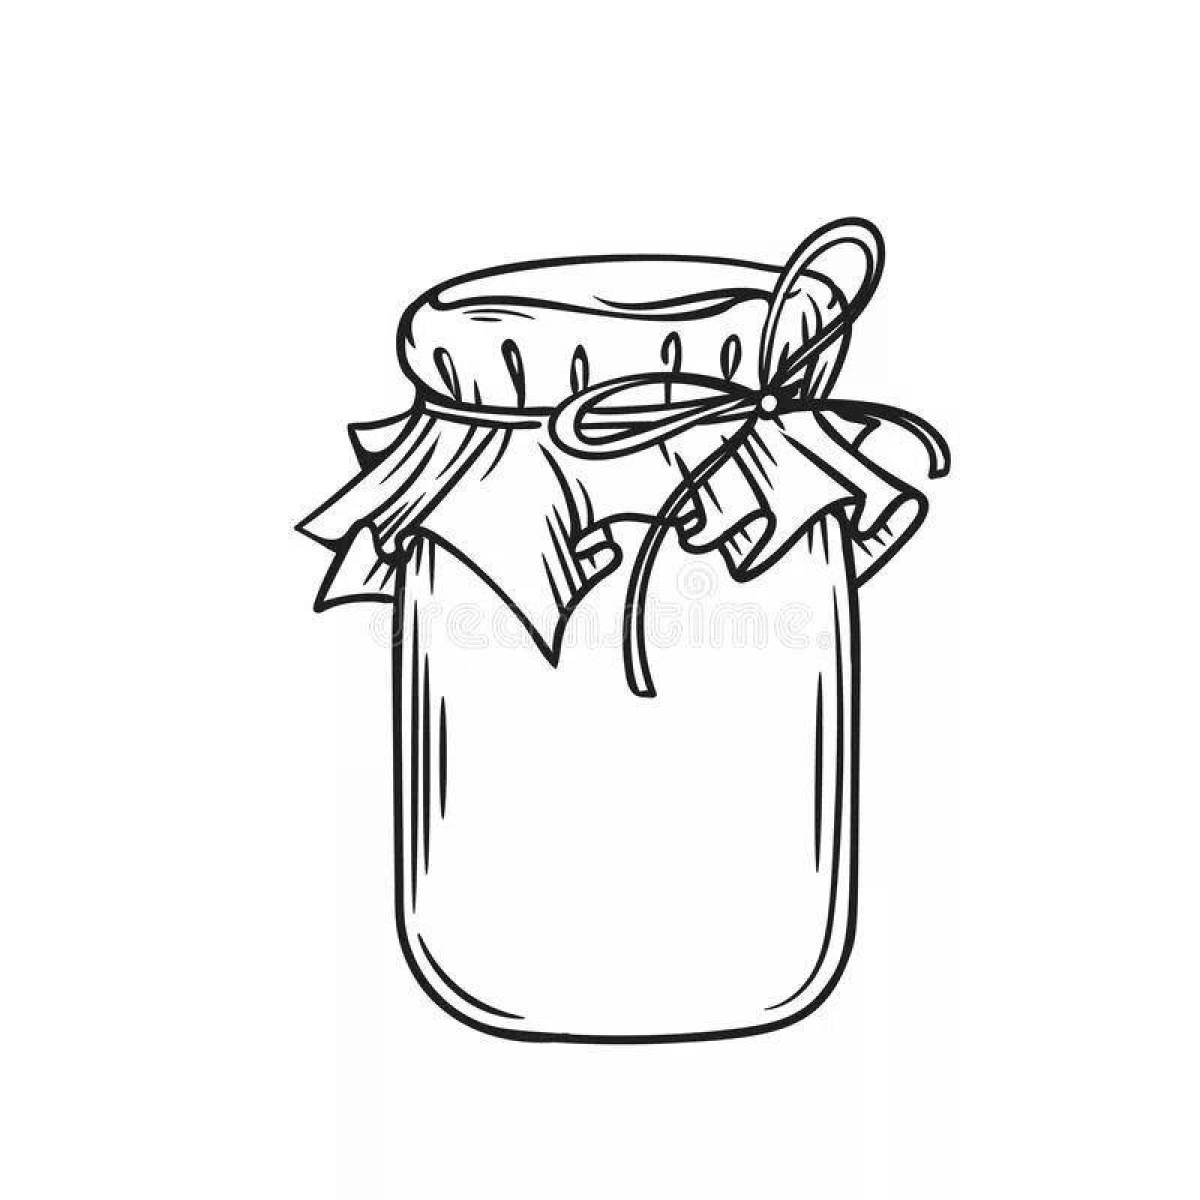 Colorful sketch of an empty jar